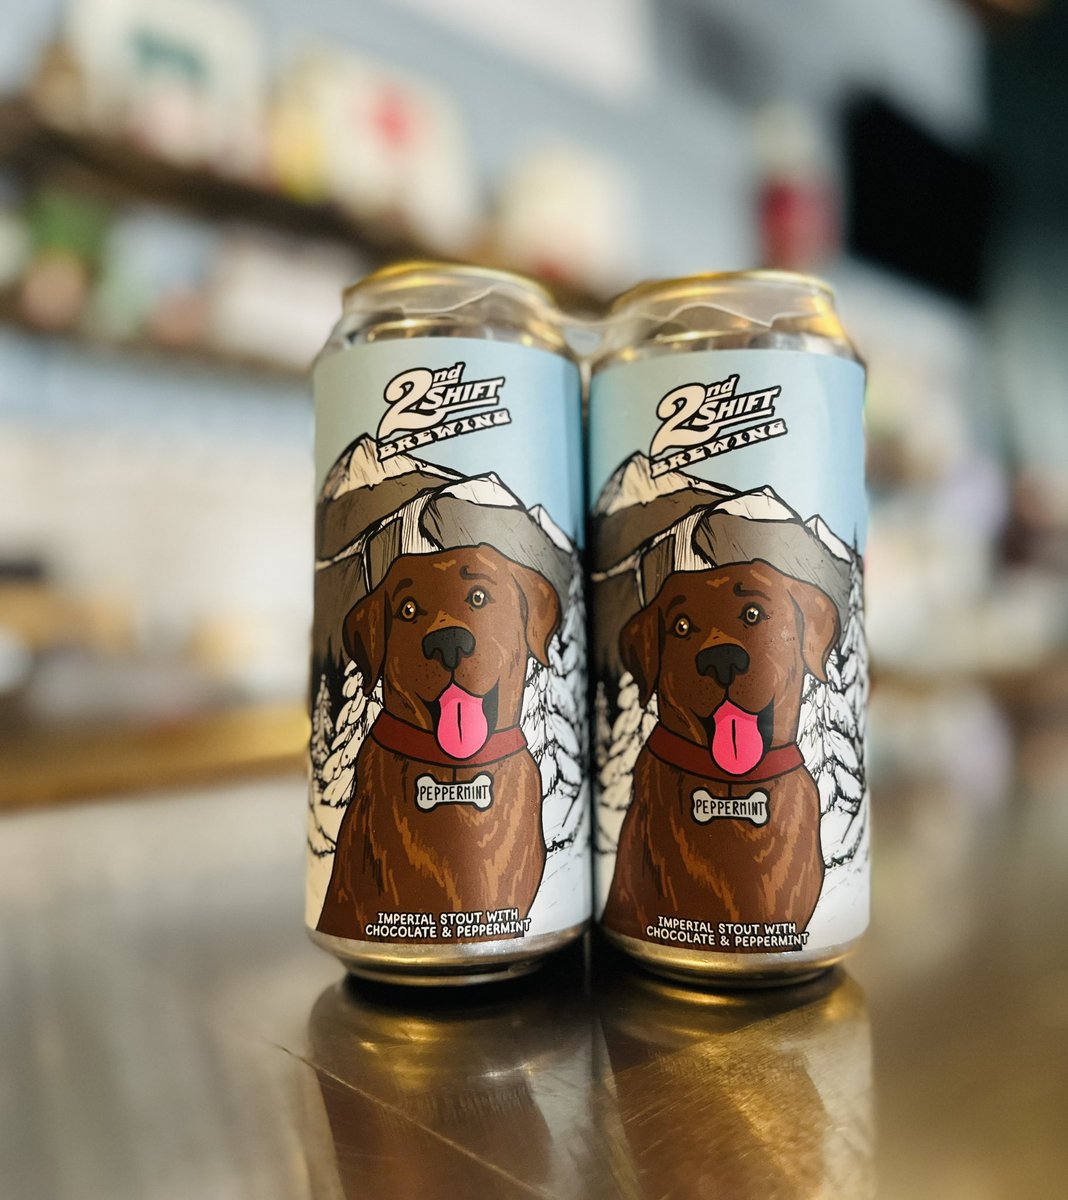 🚨New Stout Release🚨 Peppermint-Imperial Stout w/ Chocolate & Peppermint This beer is strong, sweet & ever the coolest, Peppermint is an homage to one of the best dogs that ever was. Using a new base stout, this beer has rich semi-sweet chocolate notes with just the right…